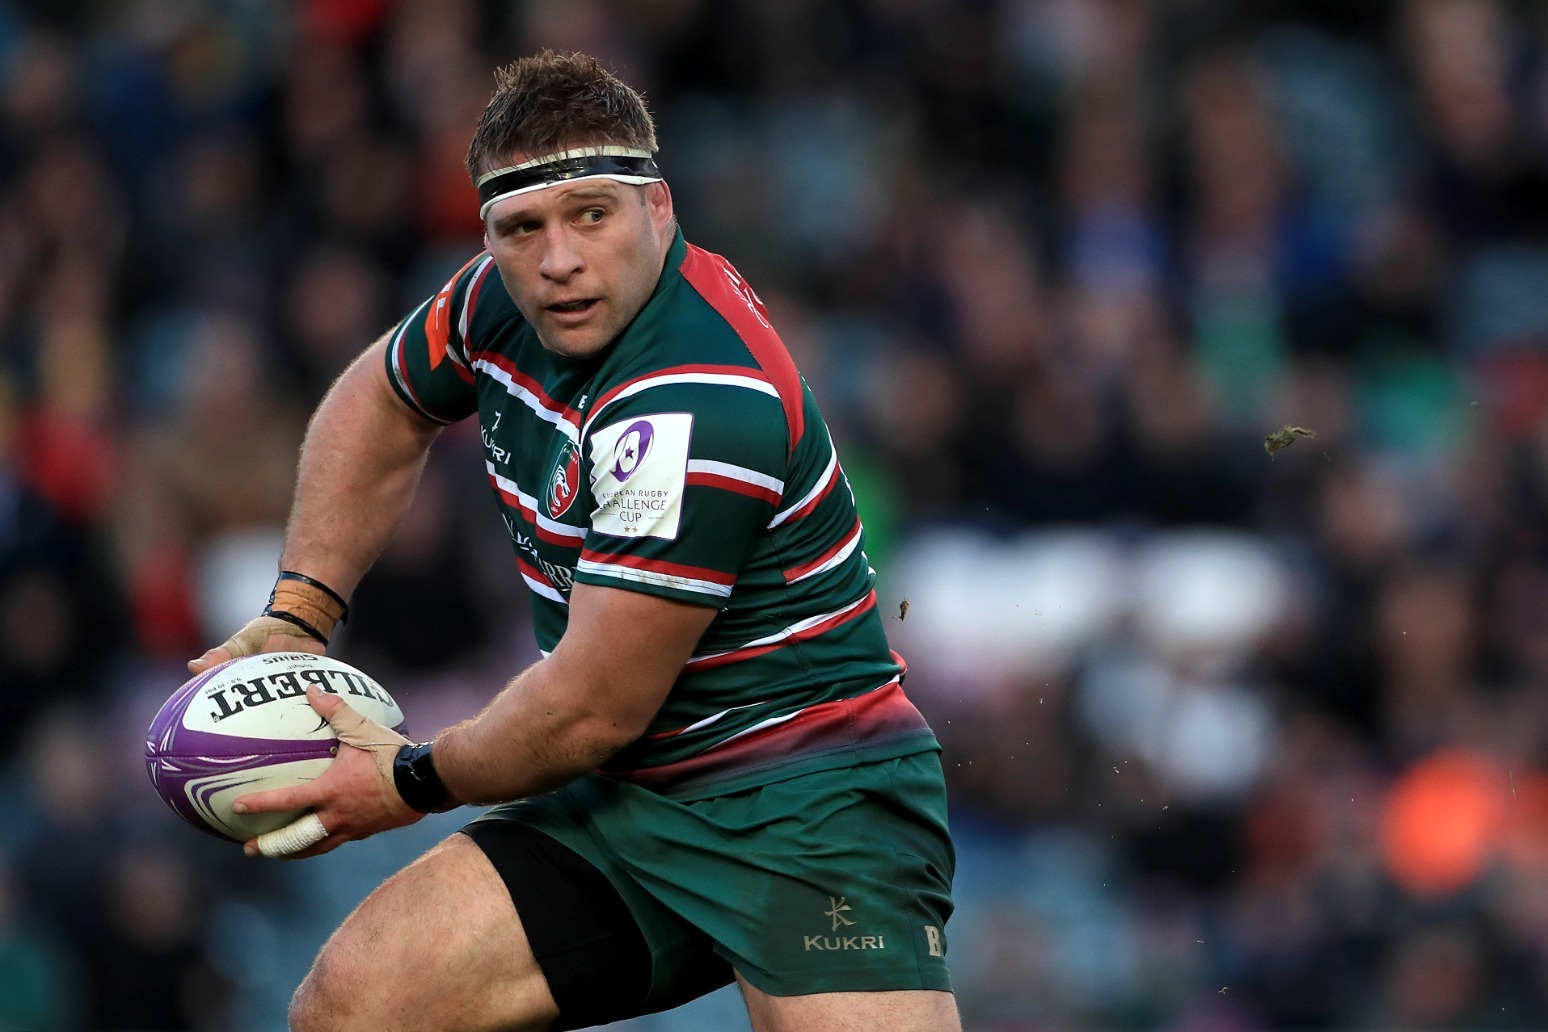 Leicester’s former England hooker Tom Youngs retires 